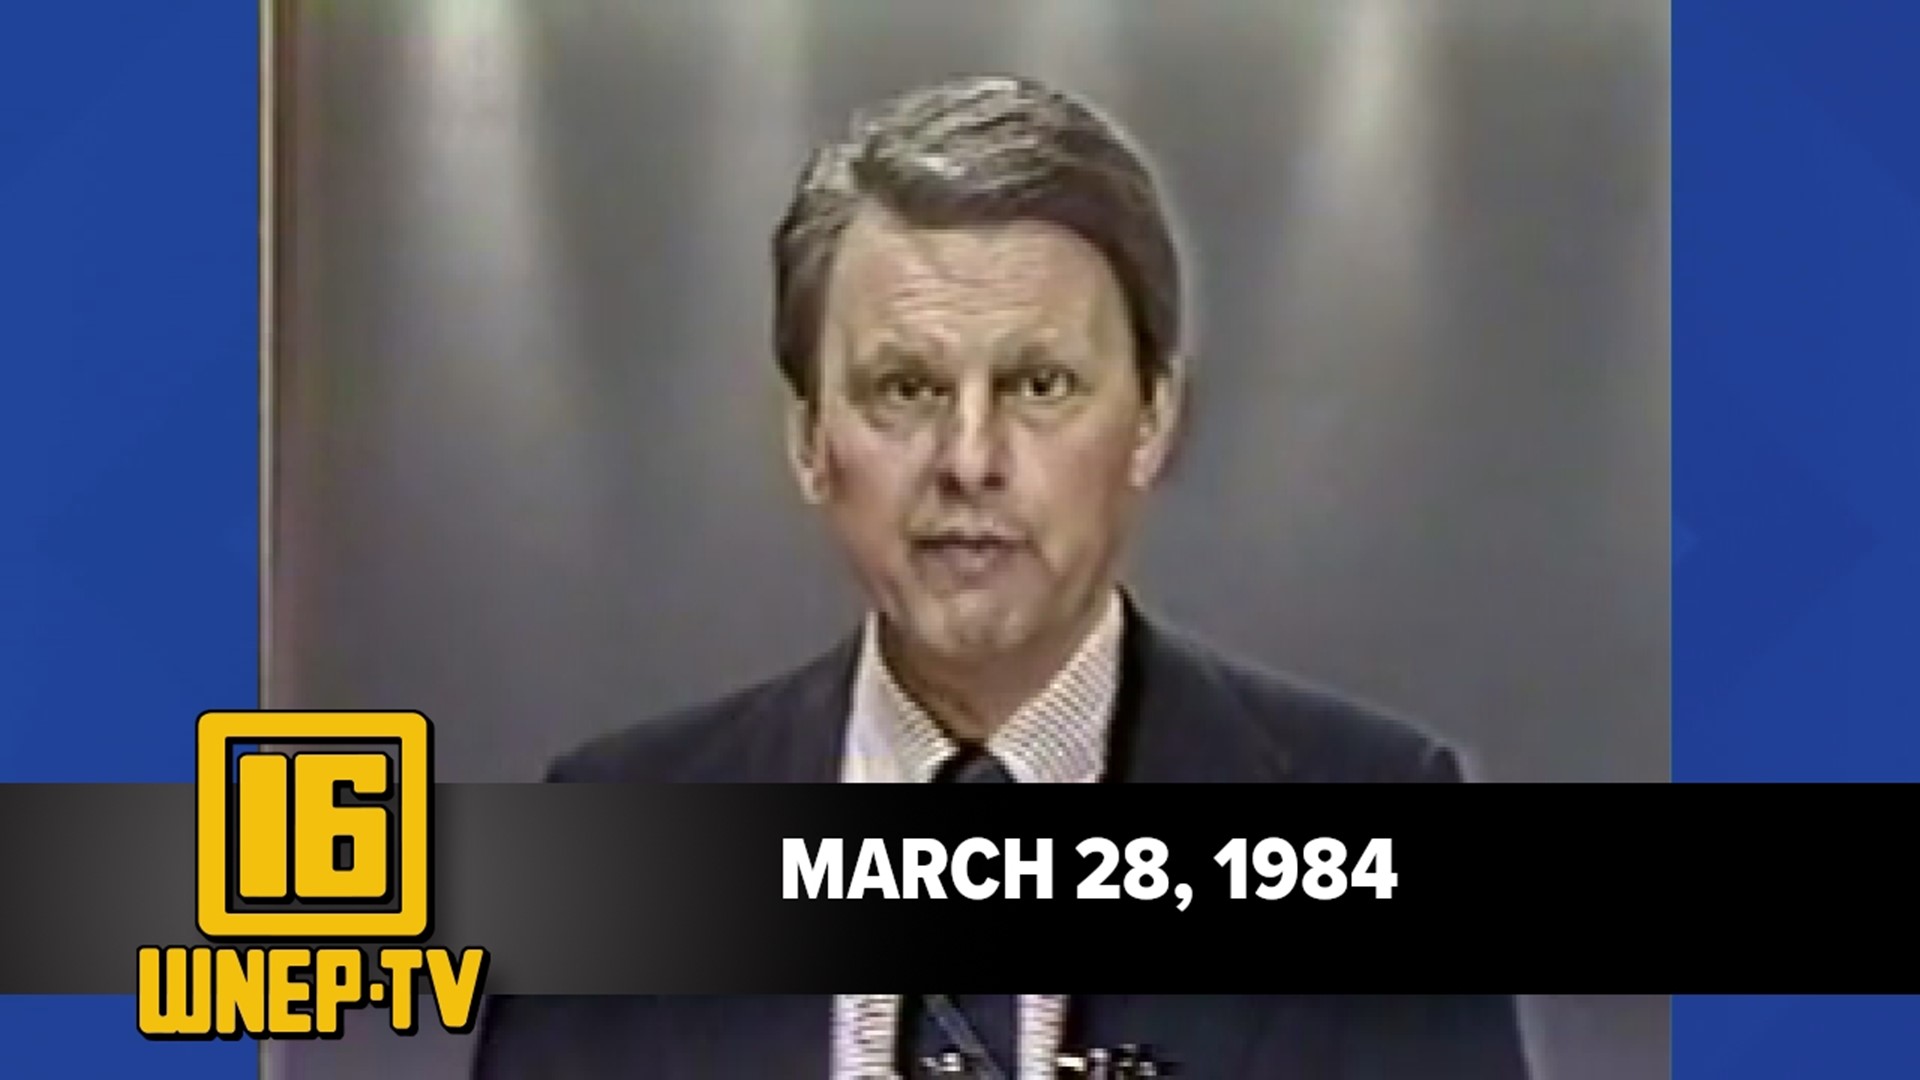 Join Frank Andrews with curated stories from March 28, 1984.